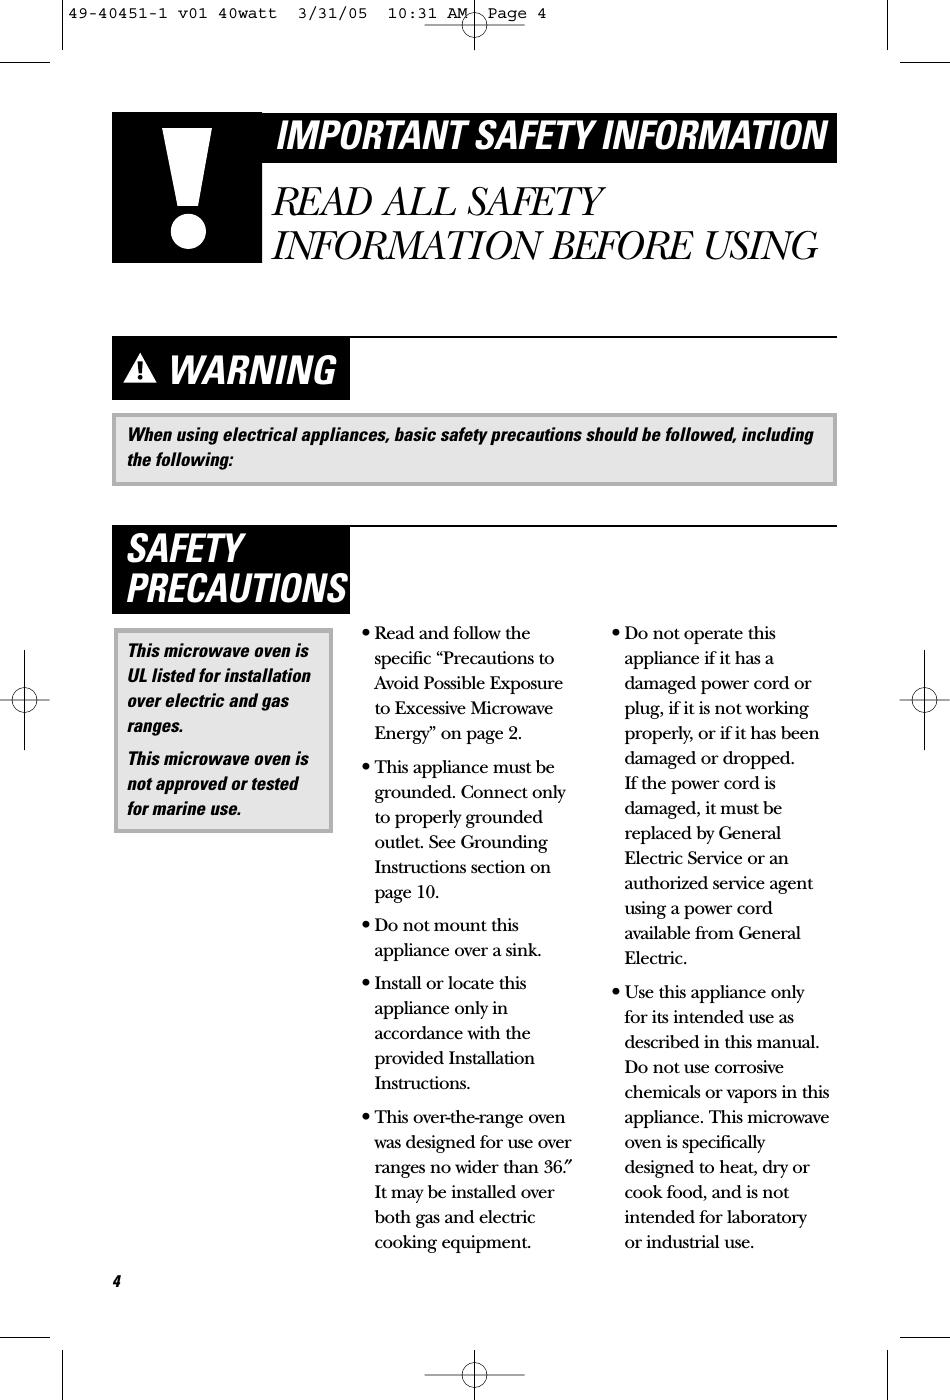 When using electrical appliances, basic safety precautions should be followed, includingthe following:WARNING•Read and follow thespecific “Precautions toAvoid Possible Exposure to Excessive MicrowaveEnergy” on page 2.•This appliance must begrounded. Connect only to properly groundedoutlet. See GroundingInstructions section onpage 10.•Do not mount thisappliance over a sink. •Install or locate thisappliance only inaccordance with theprovided InstallationInstructions.•This over-the-range ovenwas designed for use overranges no wider than 36.″It may be installed overboth gas and electriccooking equipment.•Do not operate thisappliance if it has adamaged power cord orplug, if it is not workingproperly, or if it has beendamaged or dropped. If the power cord isdamaged, it must bereplaced by GeneralElectric Service or anauthorized service agentusing a power cordavailable from GeneralElectric.•Use this appliance only for its intended use asdescribed in this manual.Do not use corrosivechemicals or vapors in thisappliance. This microwaveoven is specificallydesigned to heat, dry orcook food, and is notintended for laboratory or industrial use.This microwave oven isUL listed for installationover electric and gasranges.This microwave oven isnot approved or testedfor marine use.SAFETYPRECAUTIONS4IMPORTANT SAFETY INFORMATIONREAD ALL SAFETYINFORMATION BEFORE USING49-40451-1 v01 40watt  3/31/05  10:31 AM  Page 4